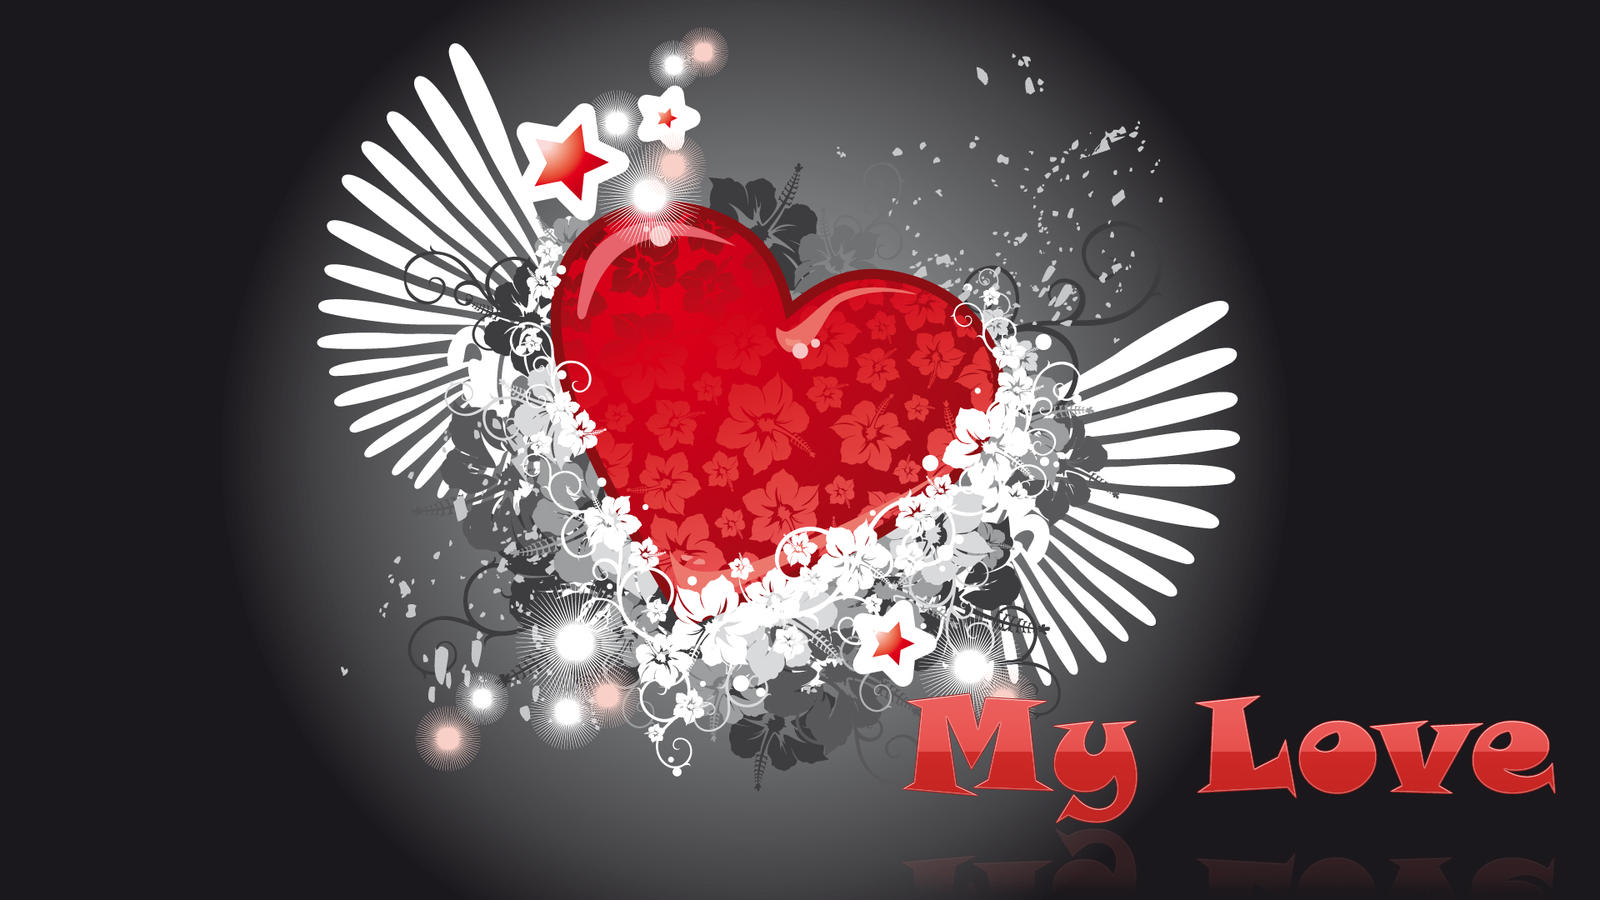 Love Background Photos Download The BEST Free Love Background Stock Photos   HD Images